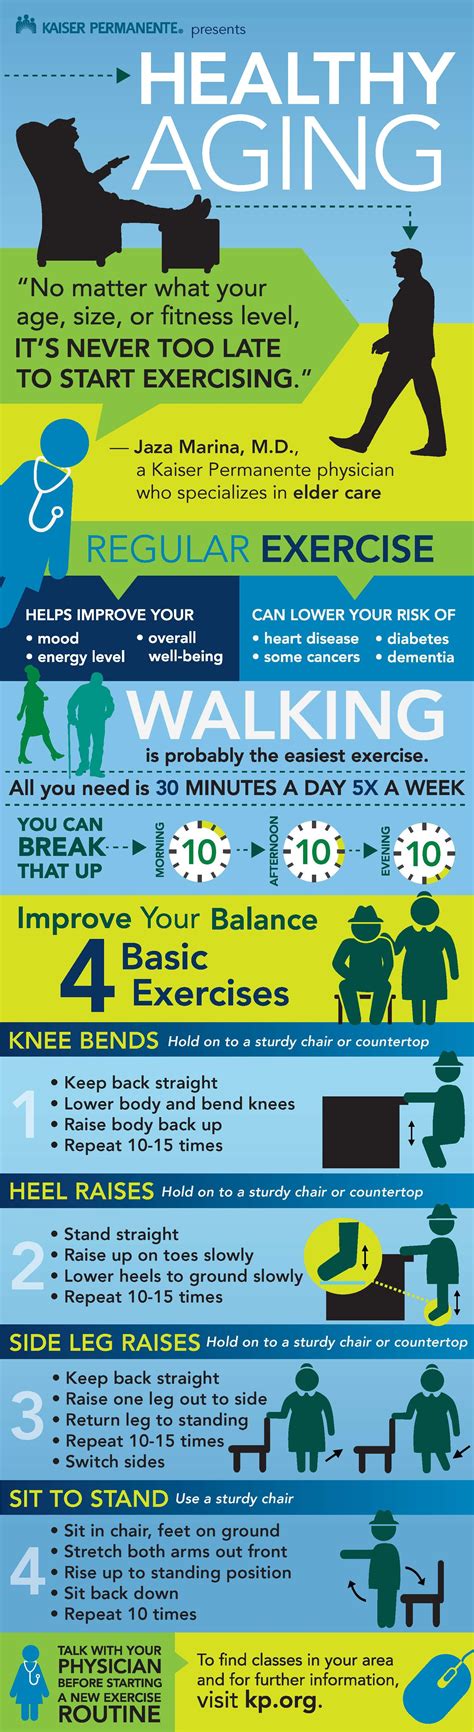 Four Basic Exercises To Help Older Adults Improve Strength And Balance